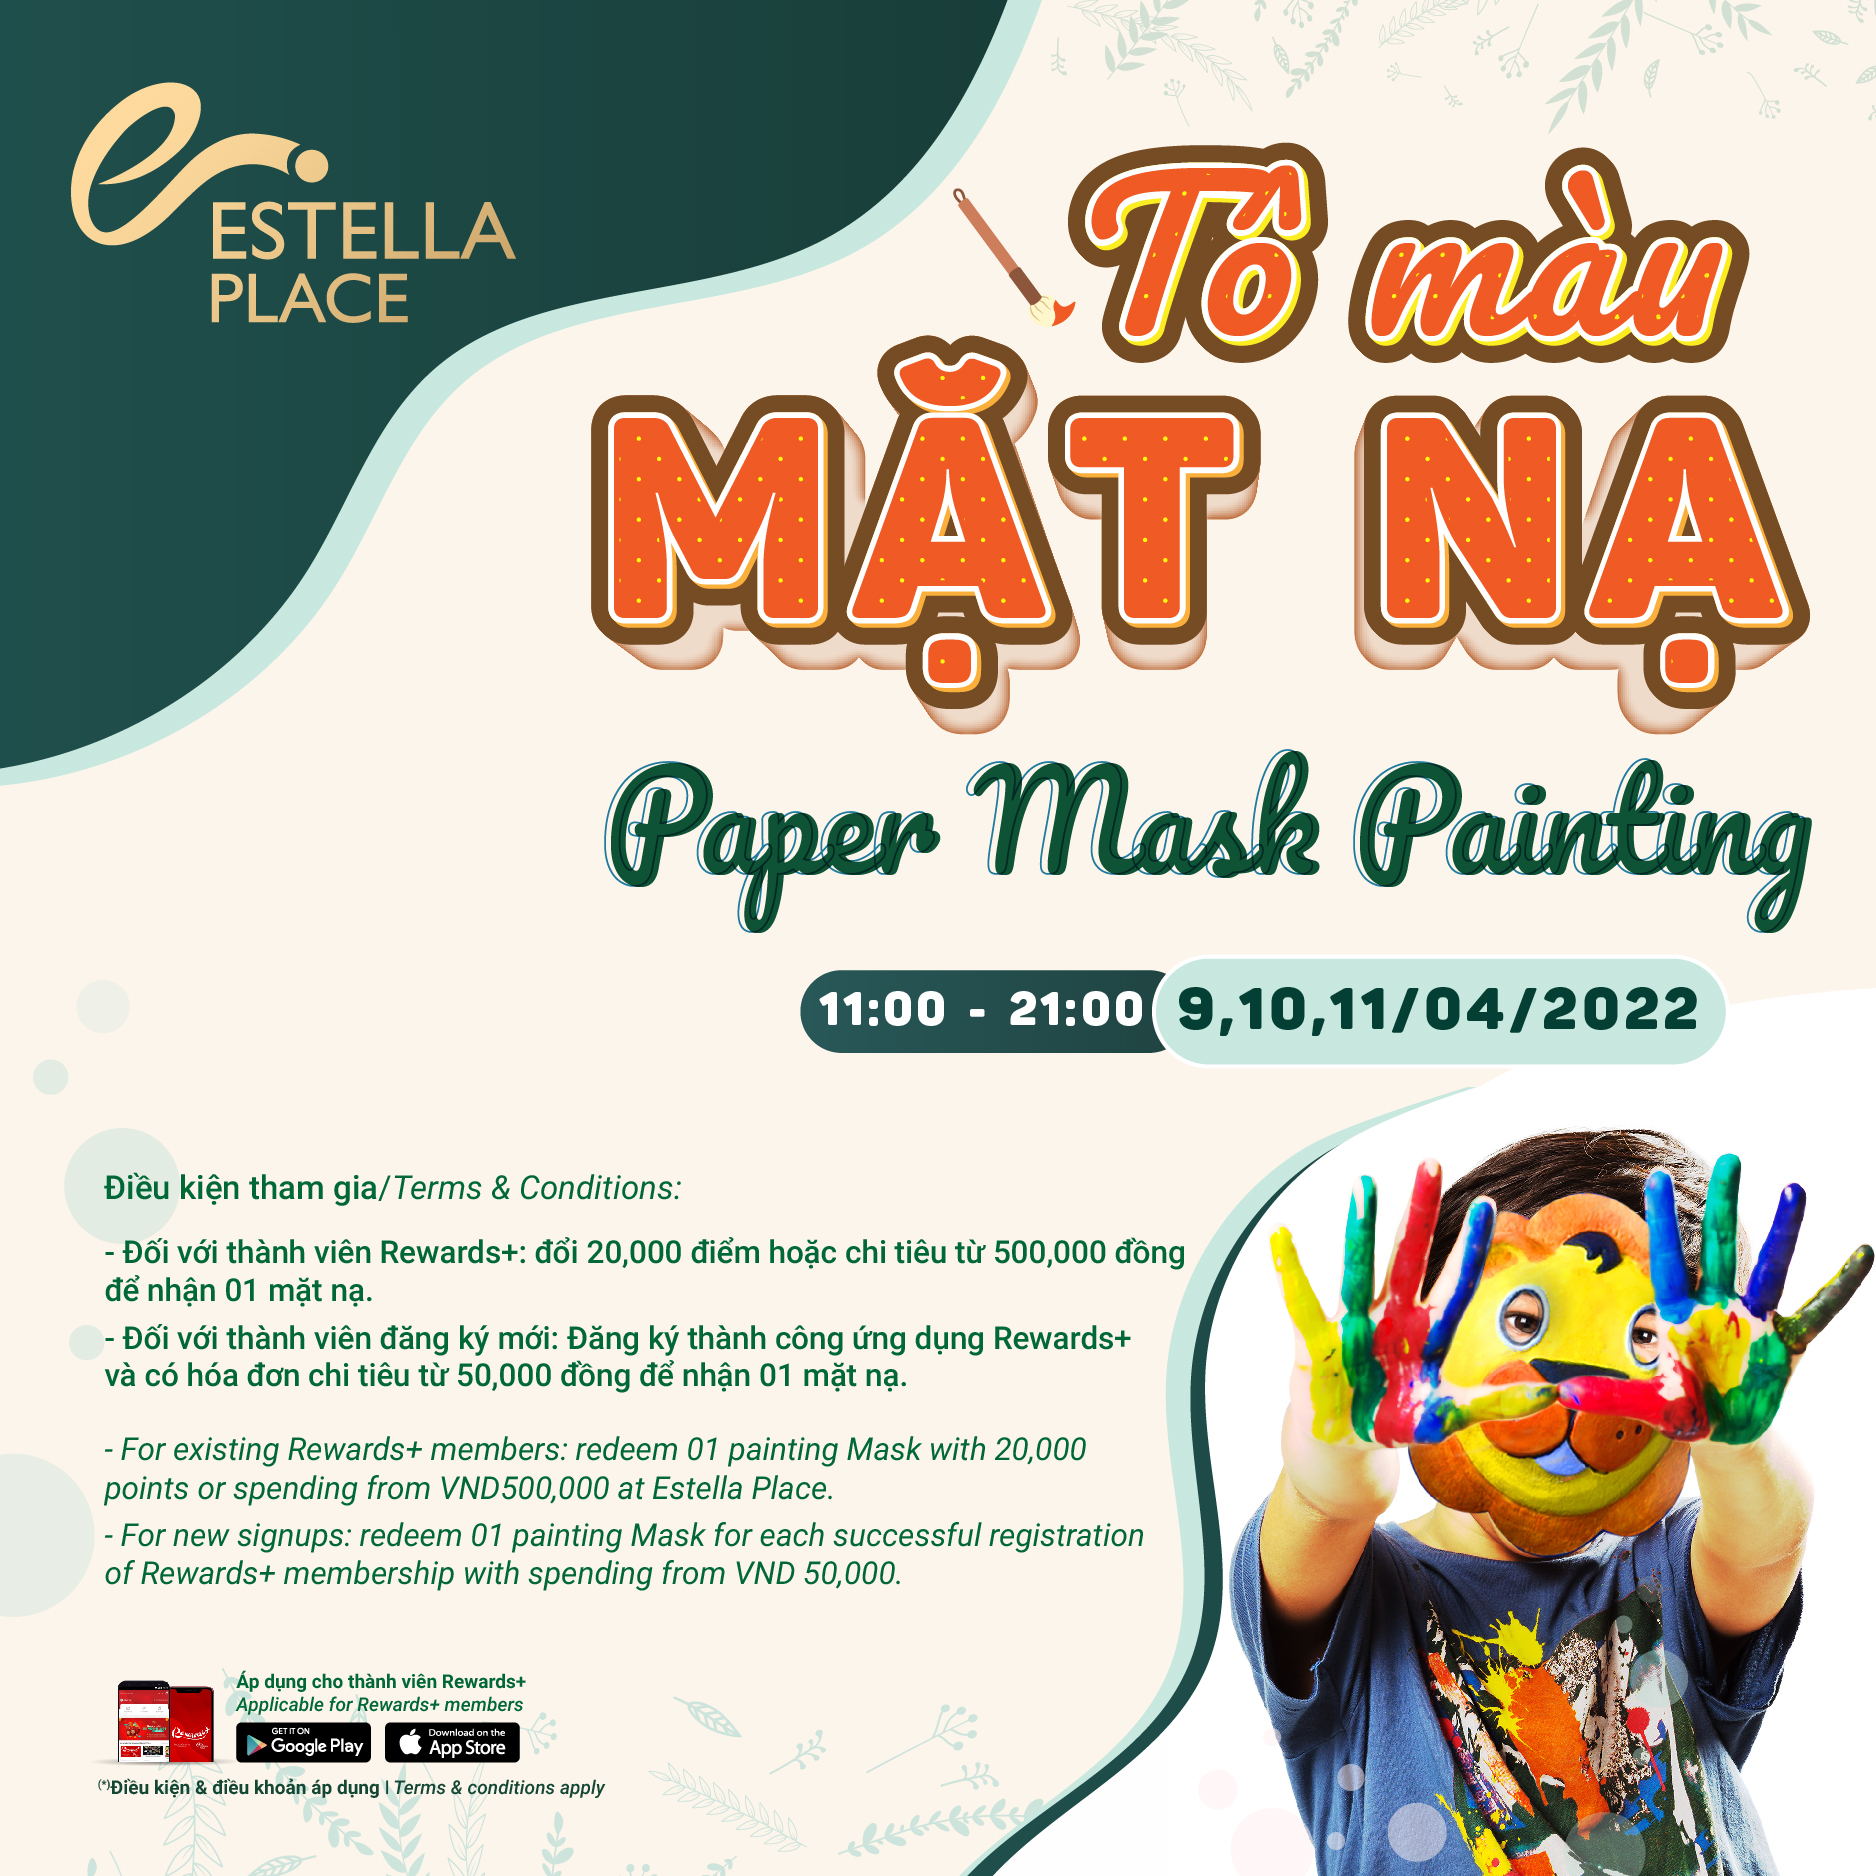 PAPER MASK PAINTING